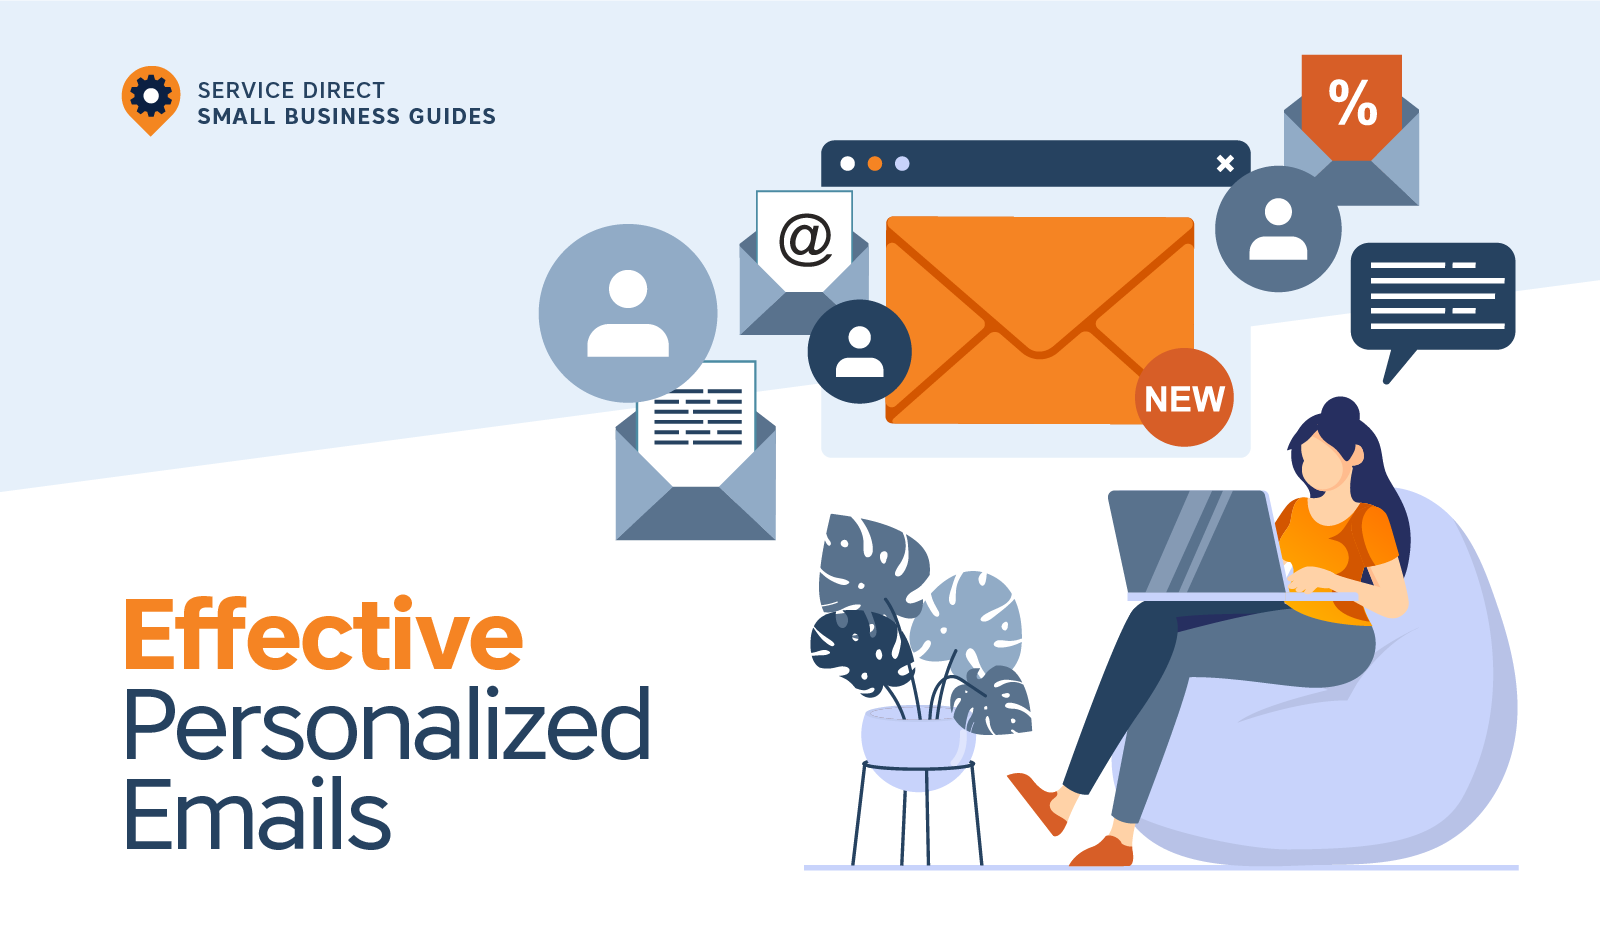 How to Personalize Emails to be More Effective